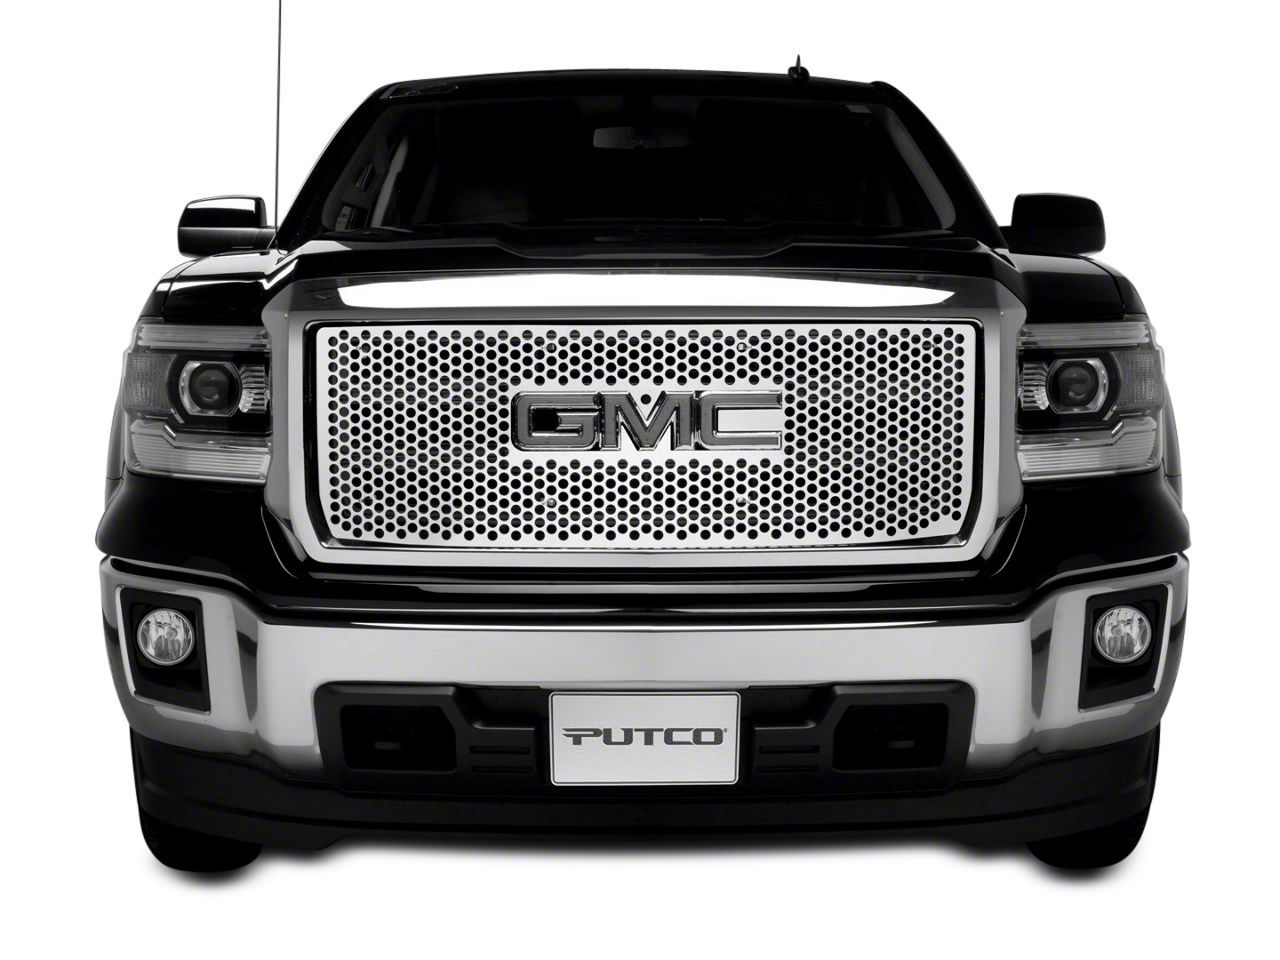 Putco Sierra 1500 Punch Design Upper Overlay Grille with Logo Cutout 84184  (14-15 Sierra 1500 w/ All-Terrain Package) - Free Shipping